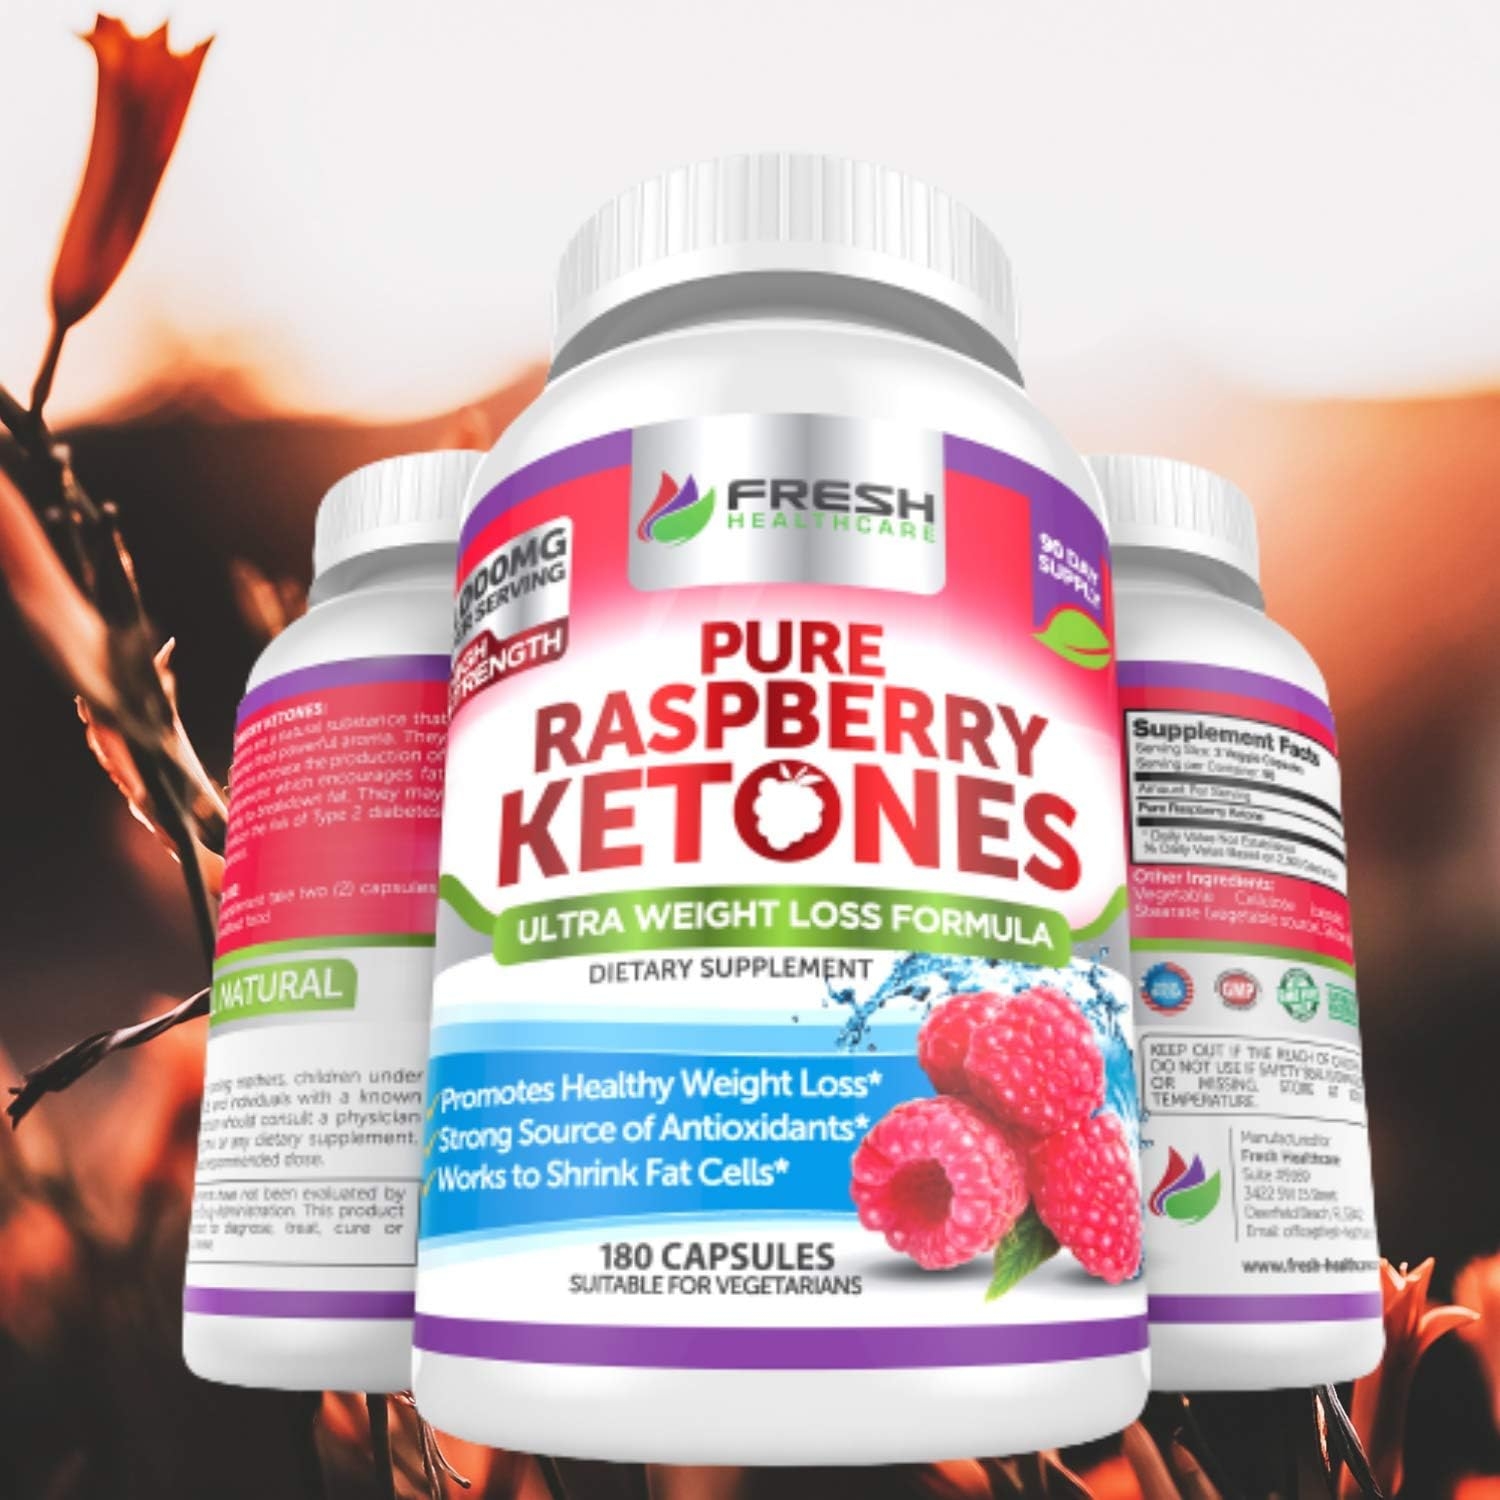 Pure 100% Raspberry Ketones Max 1000mg Per Serving - 3 Month Supply - Powerful Weight Loss Supplement - Provides Energy Boost for Weight Loss - 180 Capsules by Fresh Healthcare